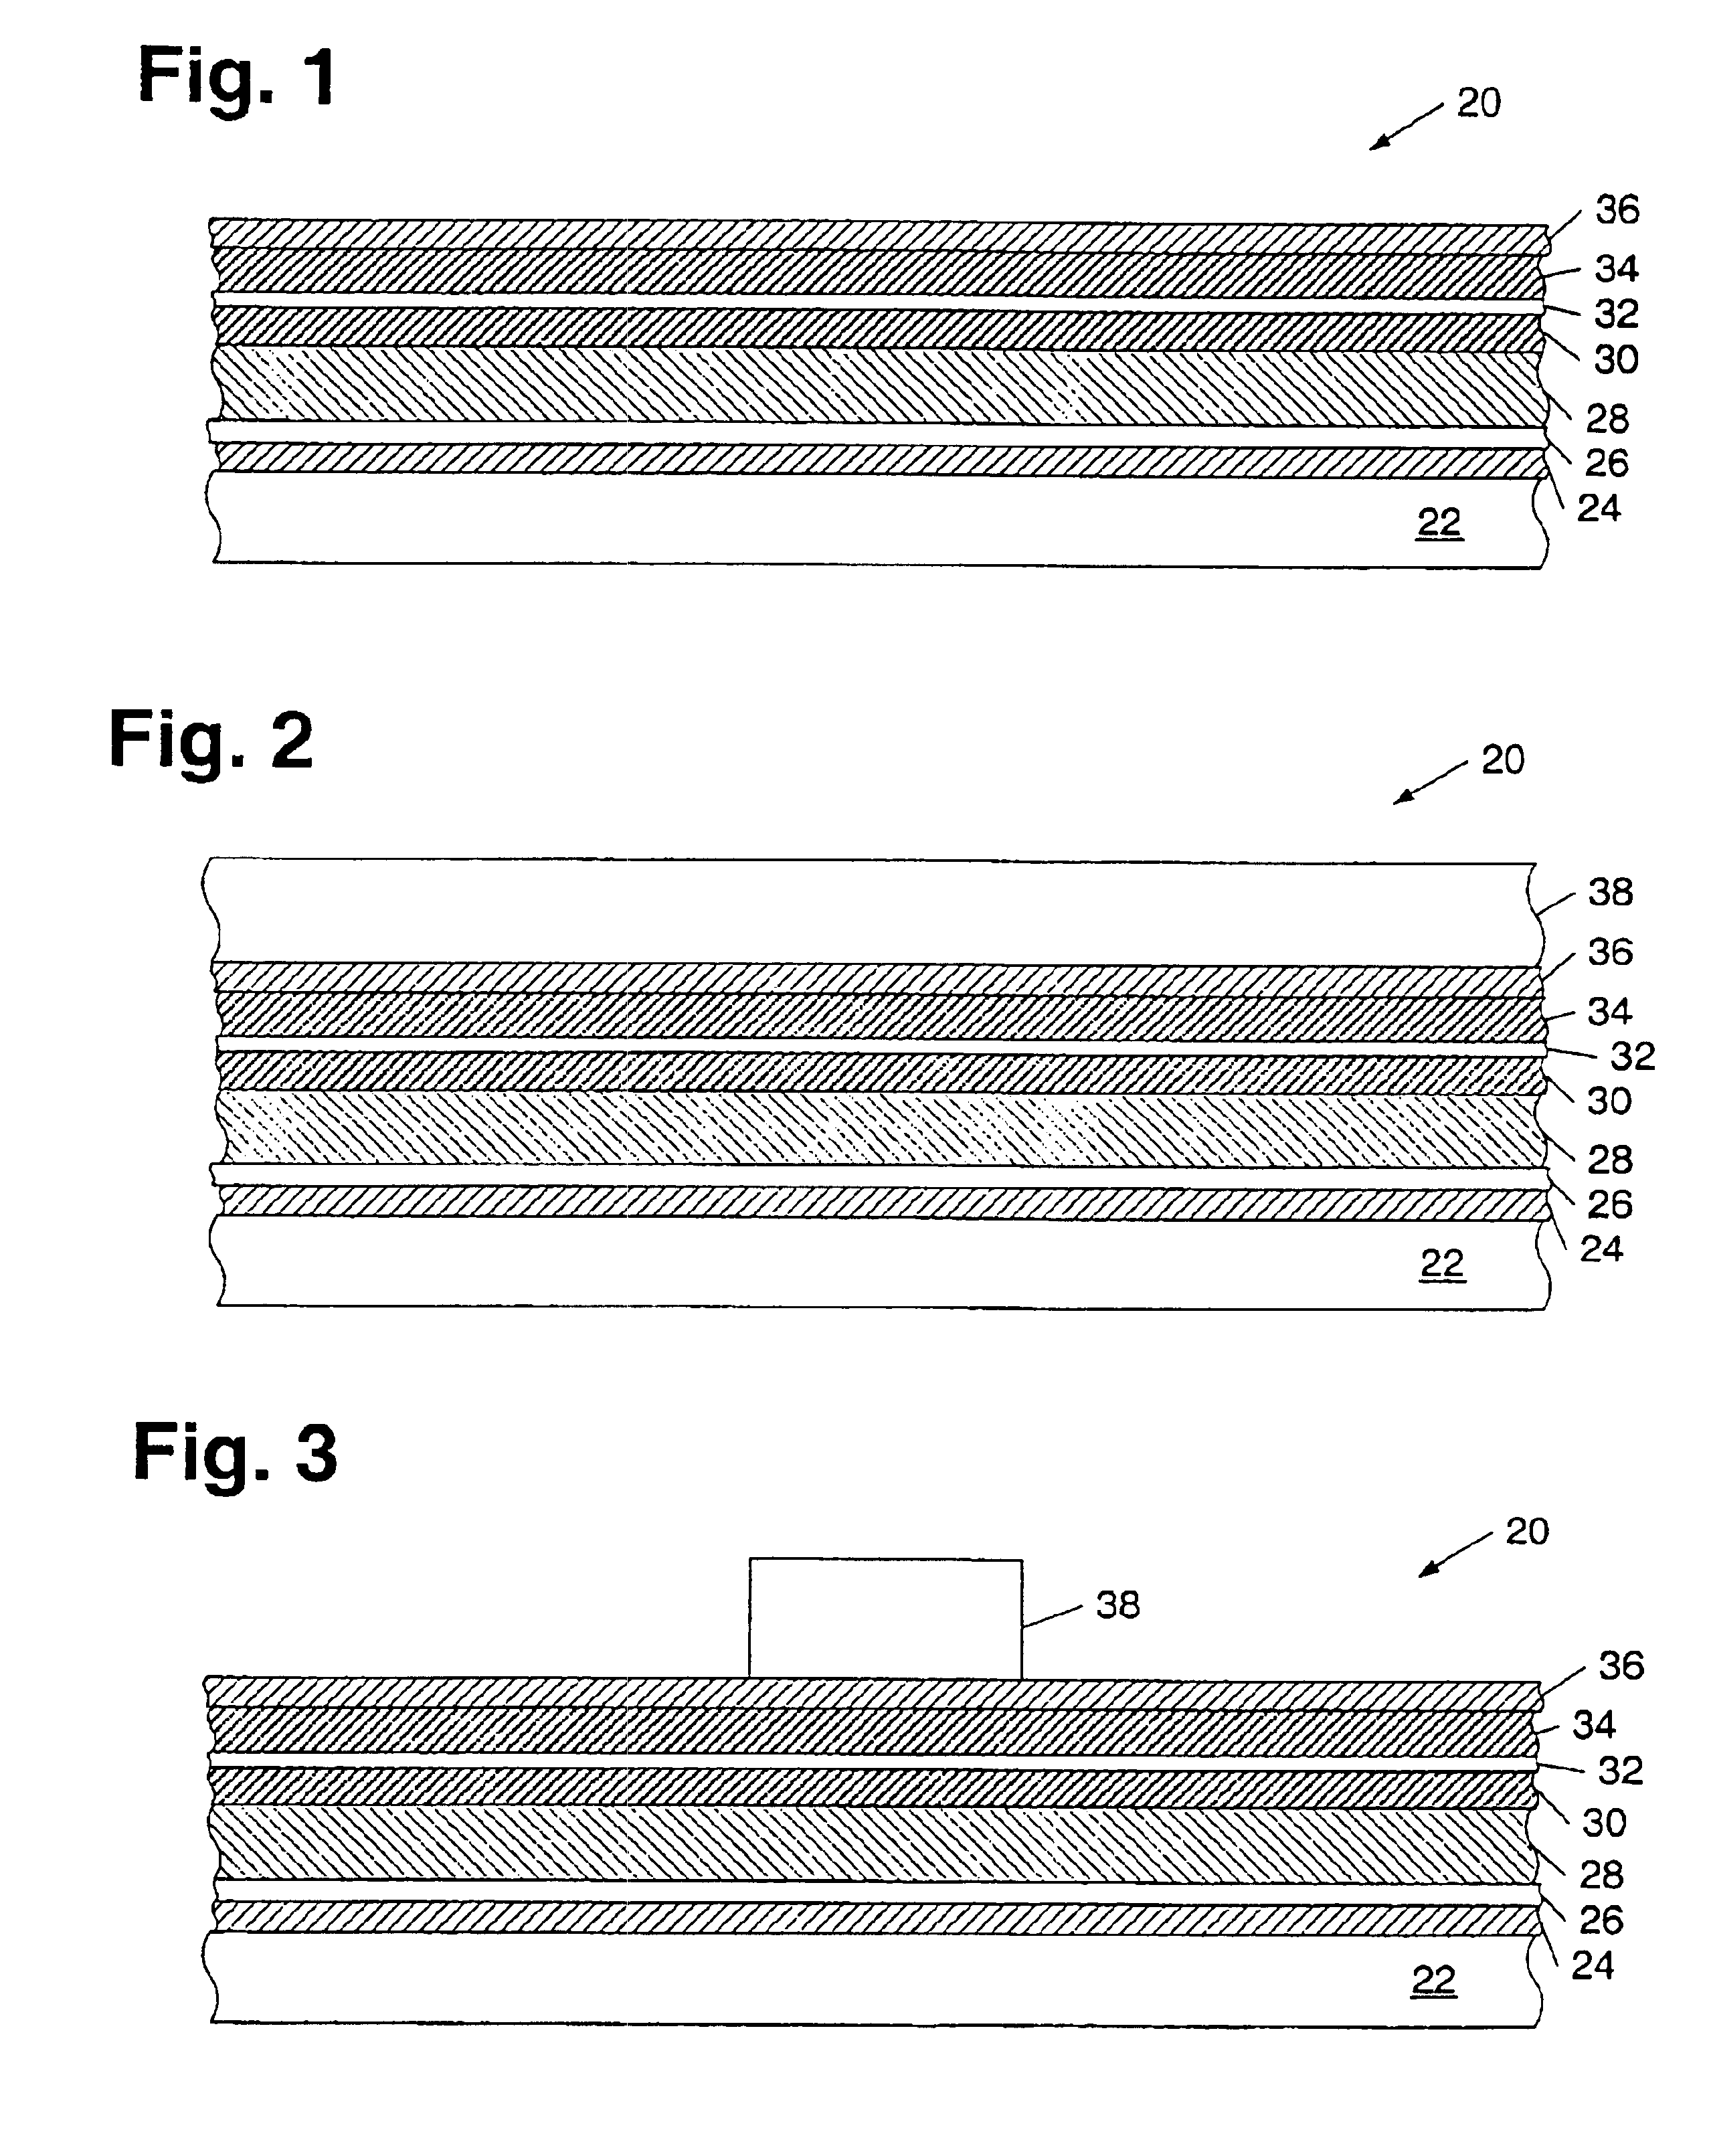 Magnetic tunneling junction configuration and a method for making the same